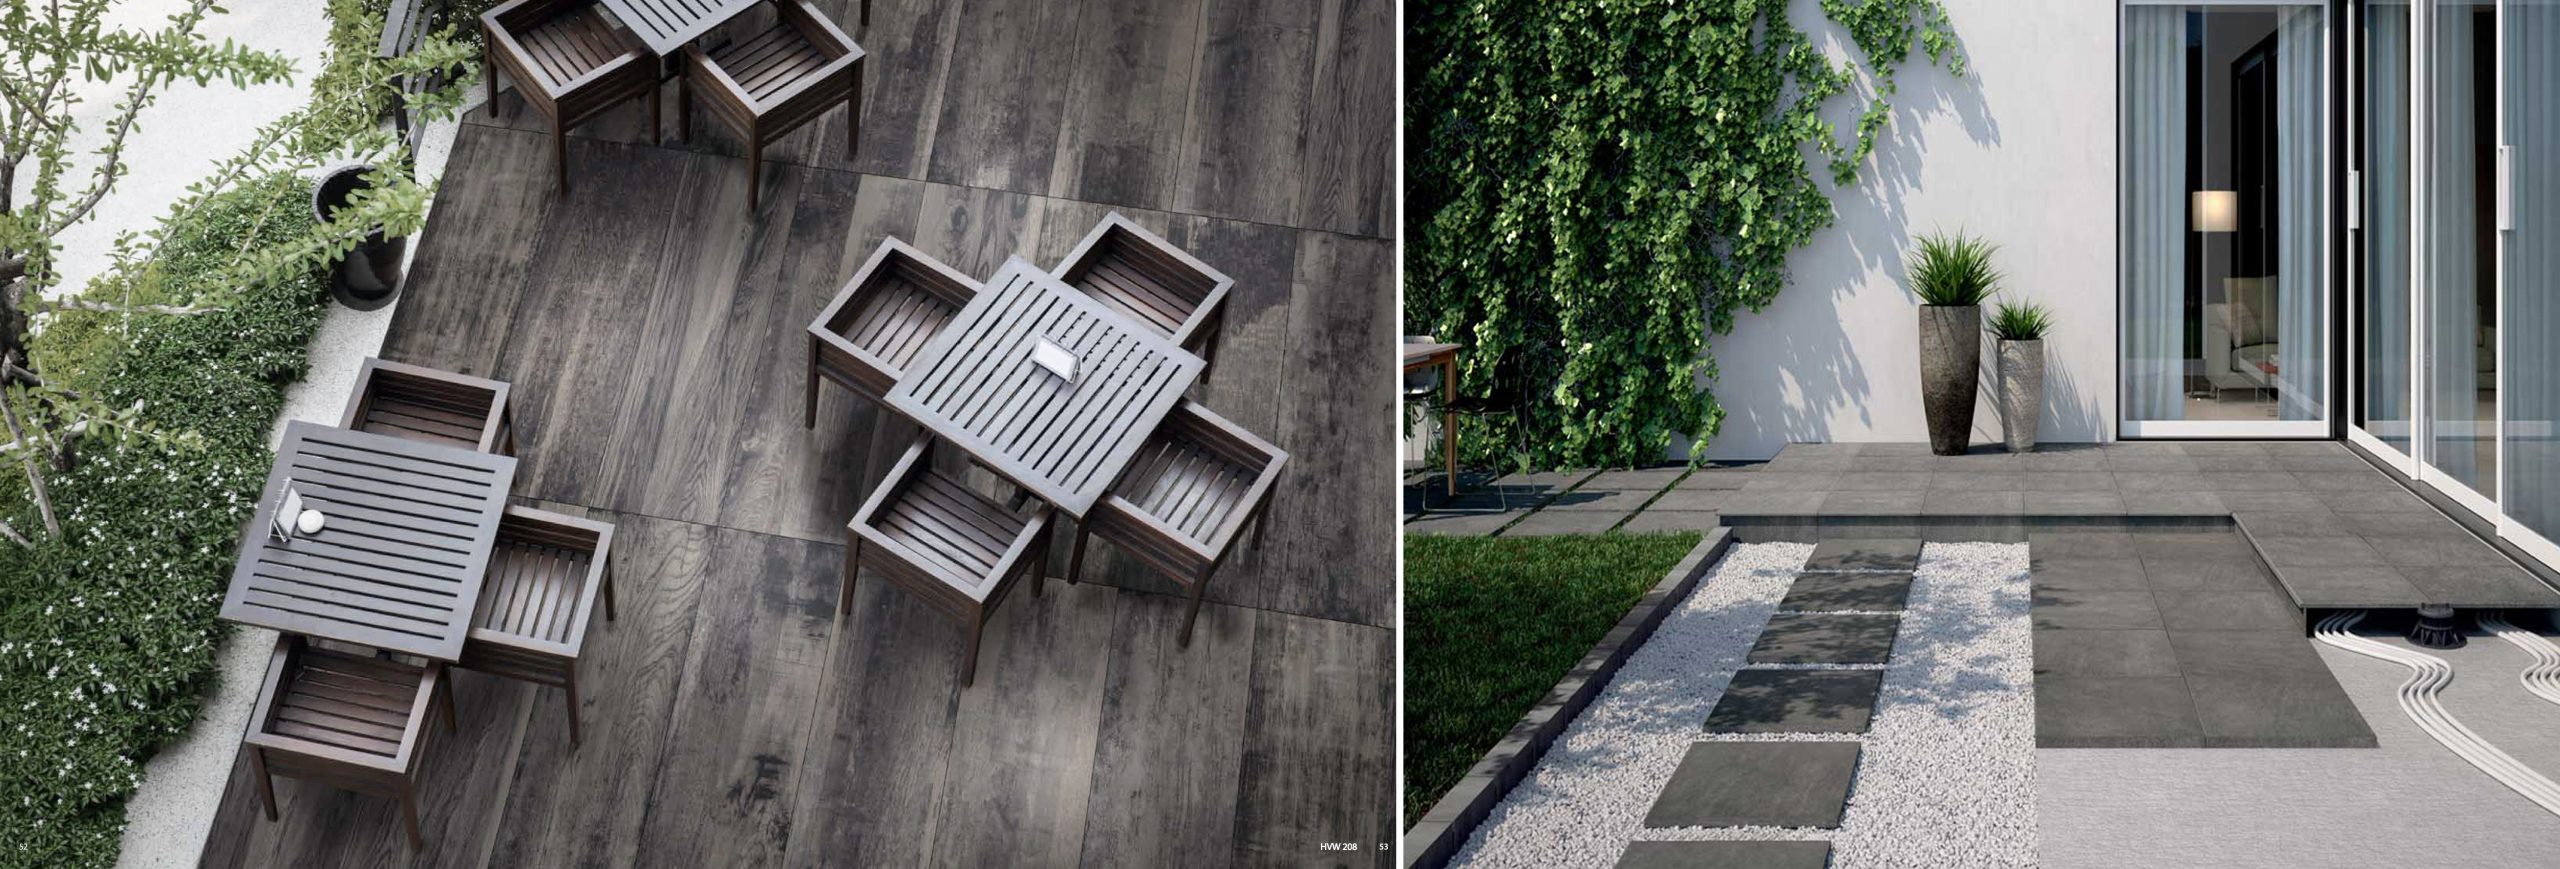 Benefits of porcelain pavers for outdoor installation